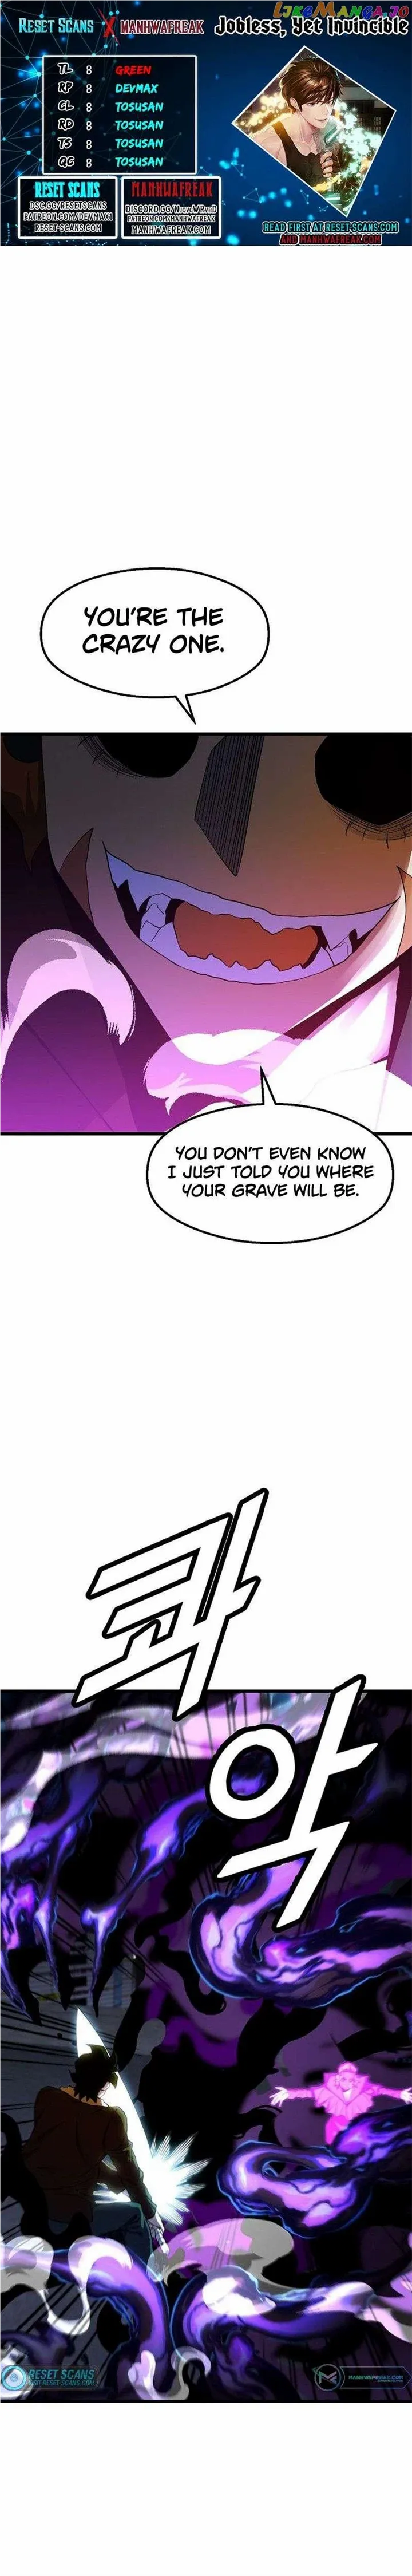 The Strongest Unemployed Hero - Page 2